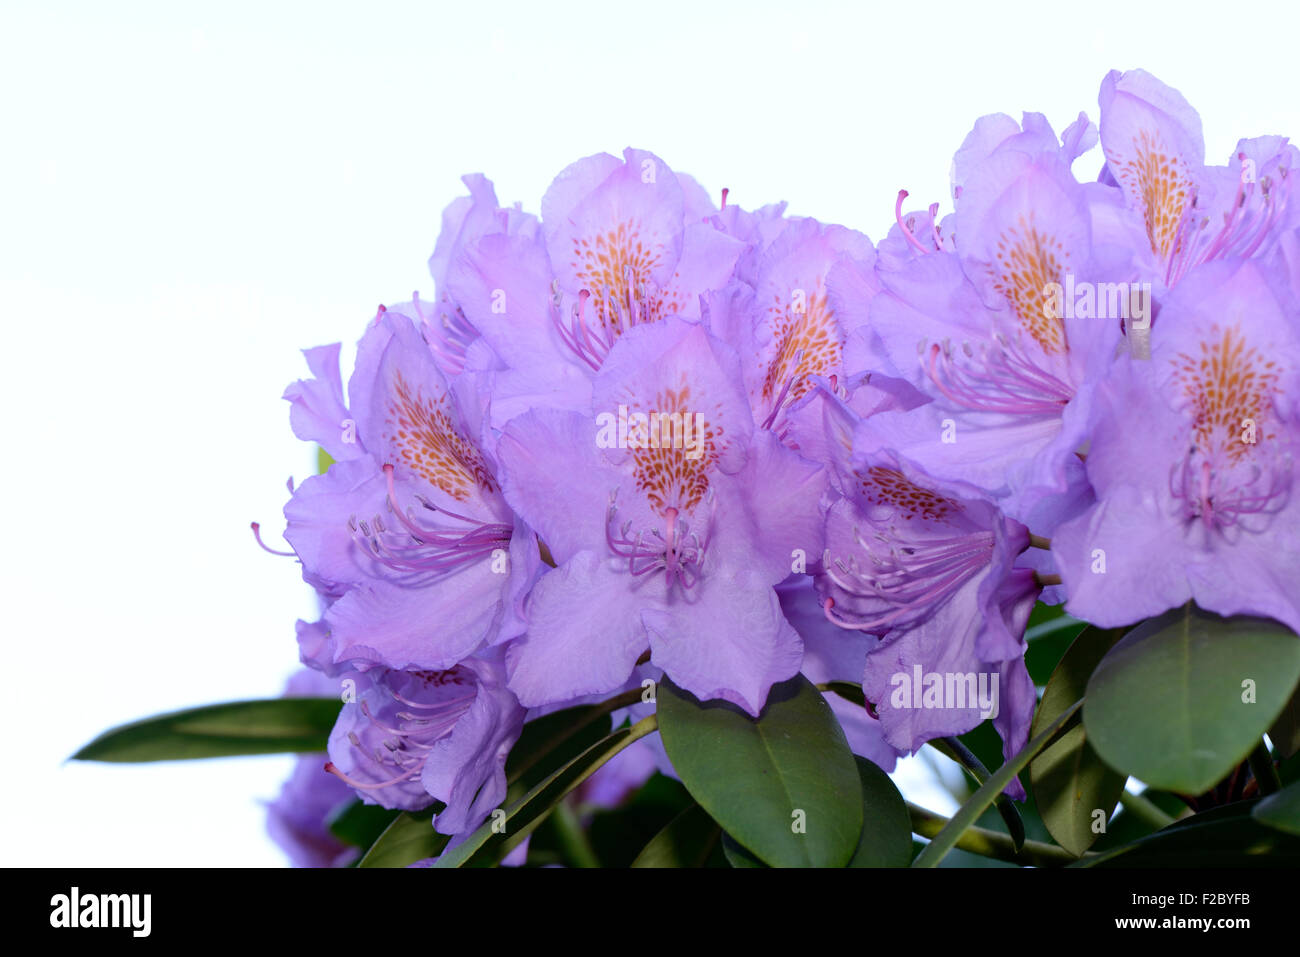 Rhododendron flowers, blooms in front of a white background Stock Photo